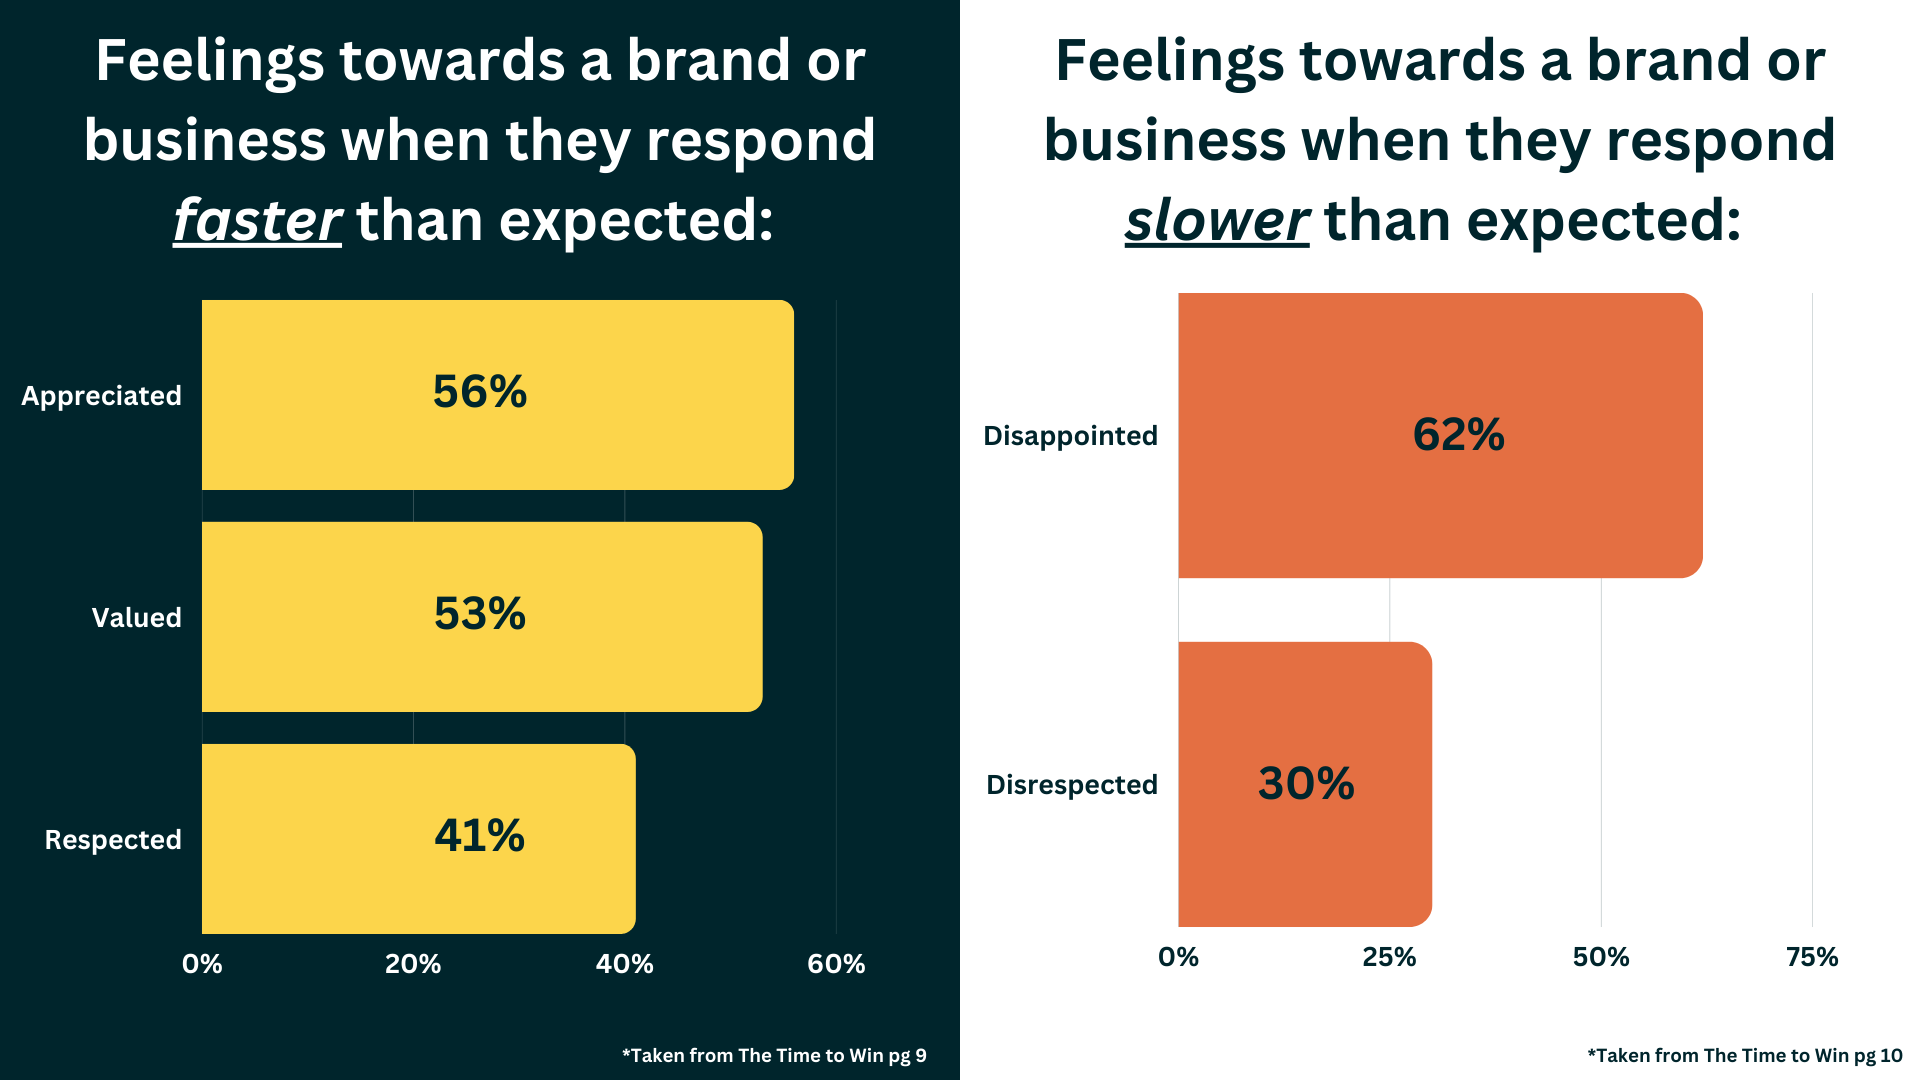 Images of two seperate bar graphs showing the different feelings that customers feel when a brand is faster or slower than they expect.